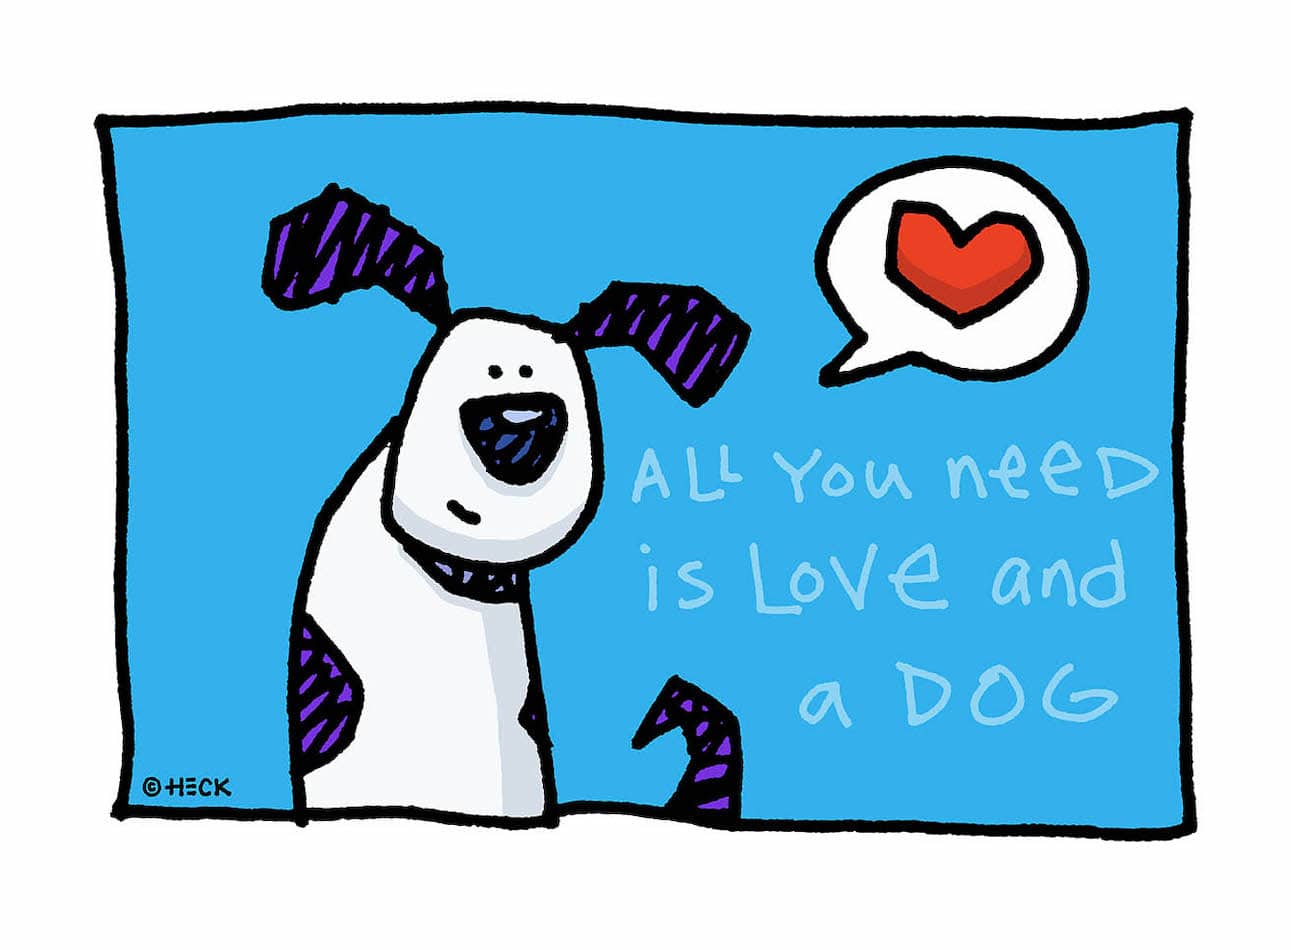 Ed-Heck-All-you-need-is-love-and-a-dog